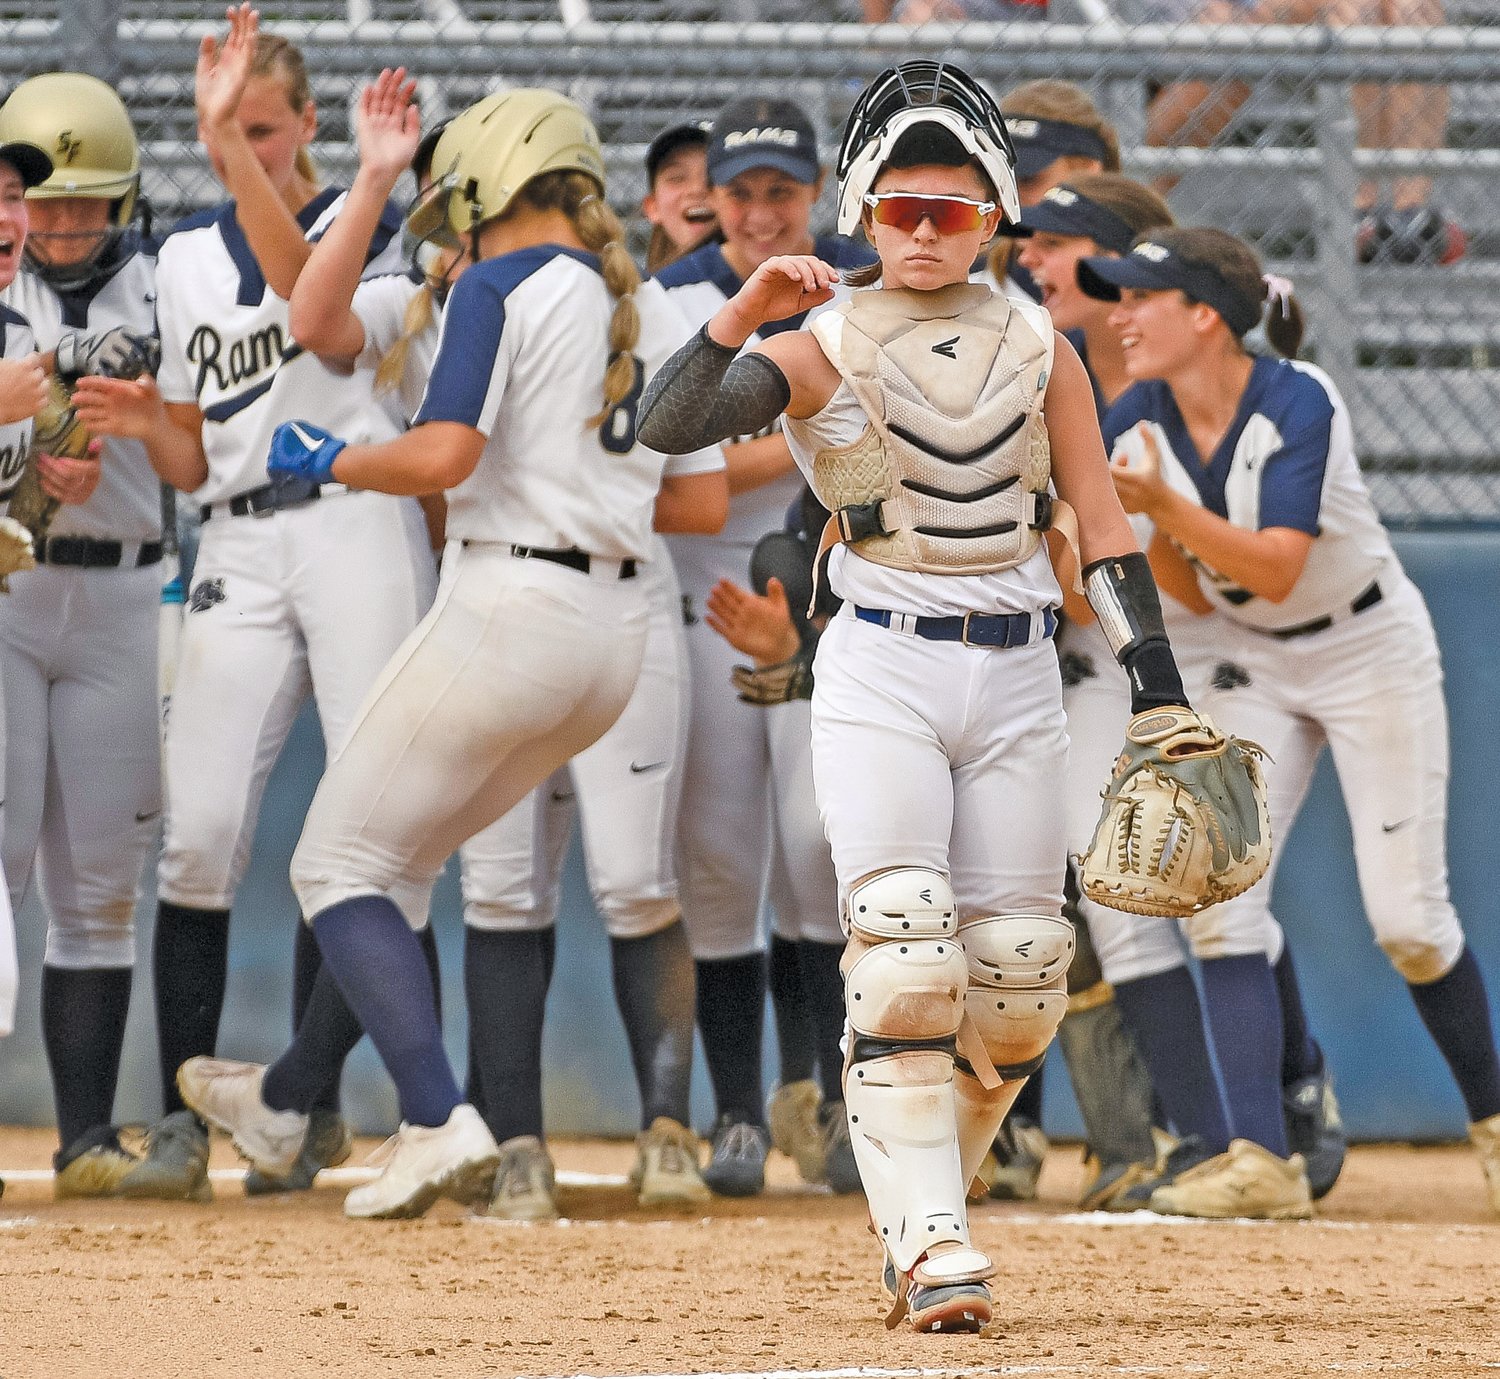 Quakertown catcher LauraRose Morelock walks to the mound as Spring-Ford’s Bri Peck crosses home plate after her third-inning home run, which put the Rams ahead 2-0.